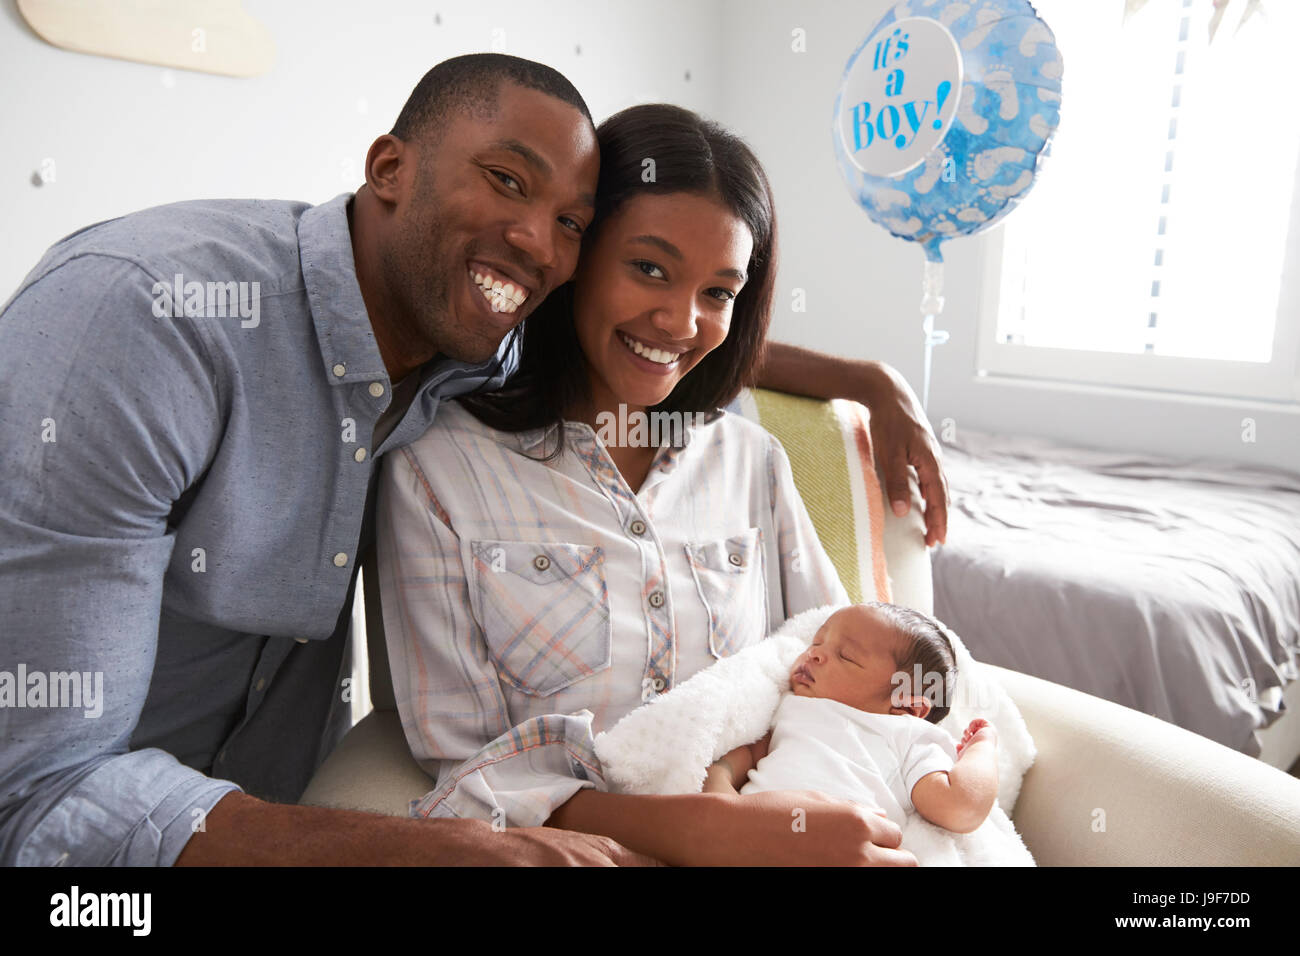 Portrait Of Parents Home from Hospital With Newborn Baby Stock Photo